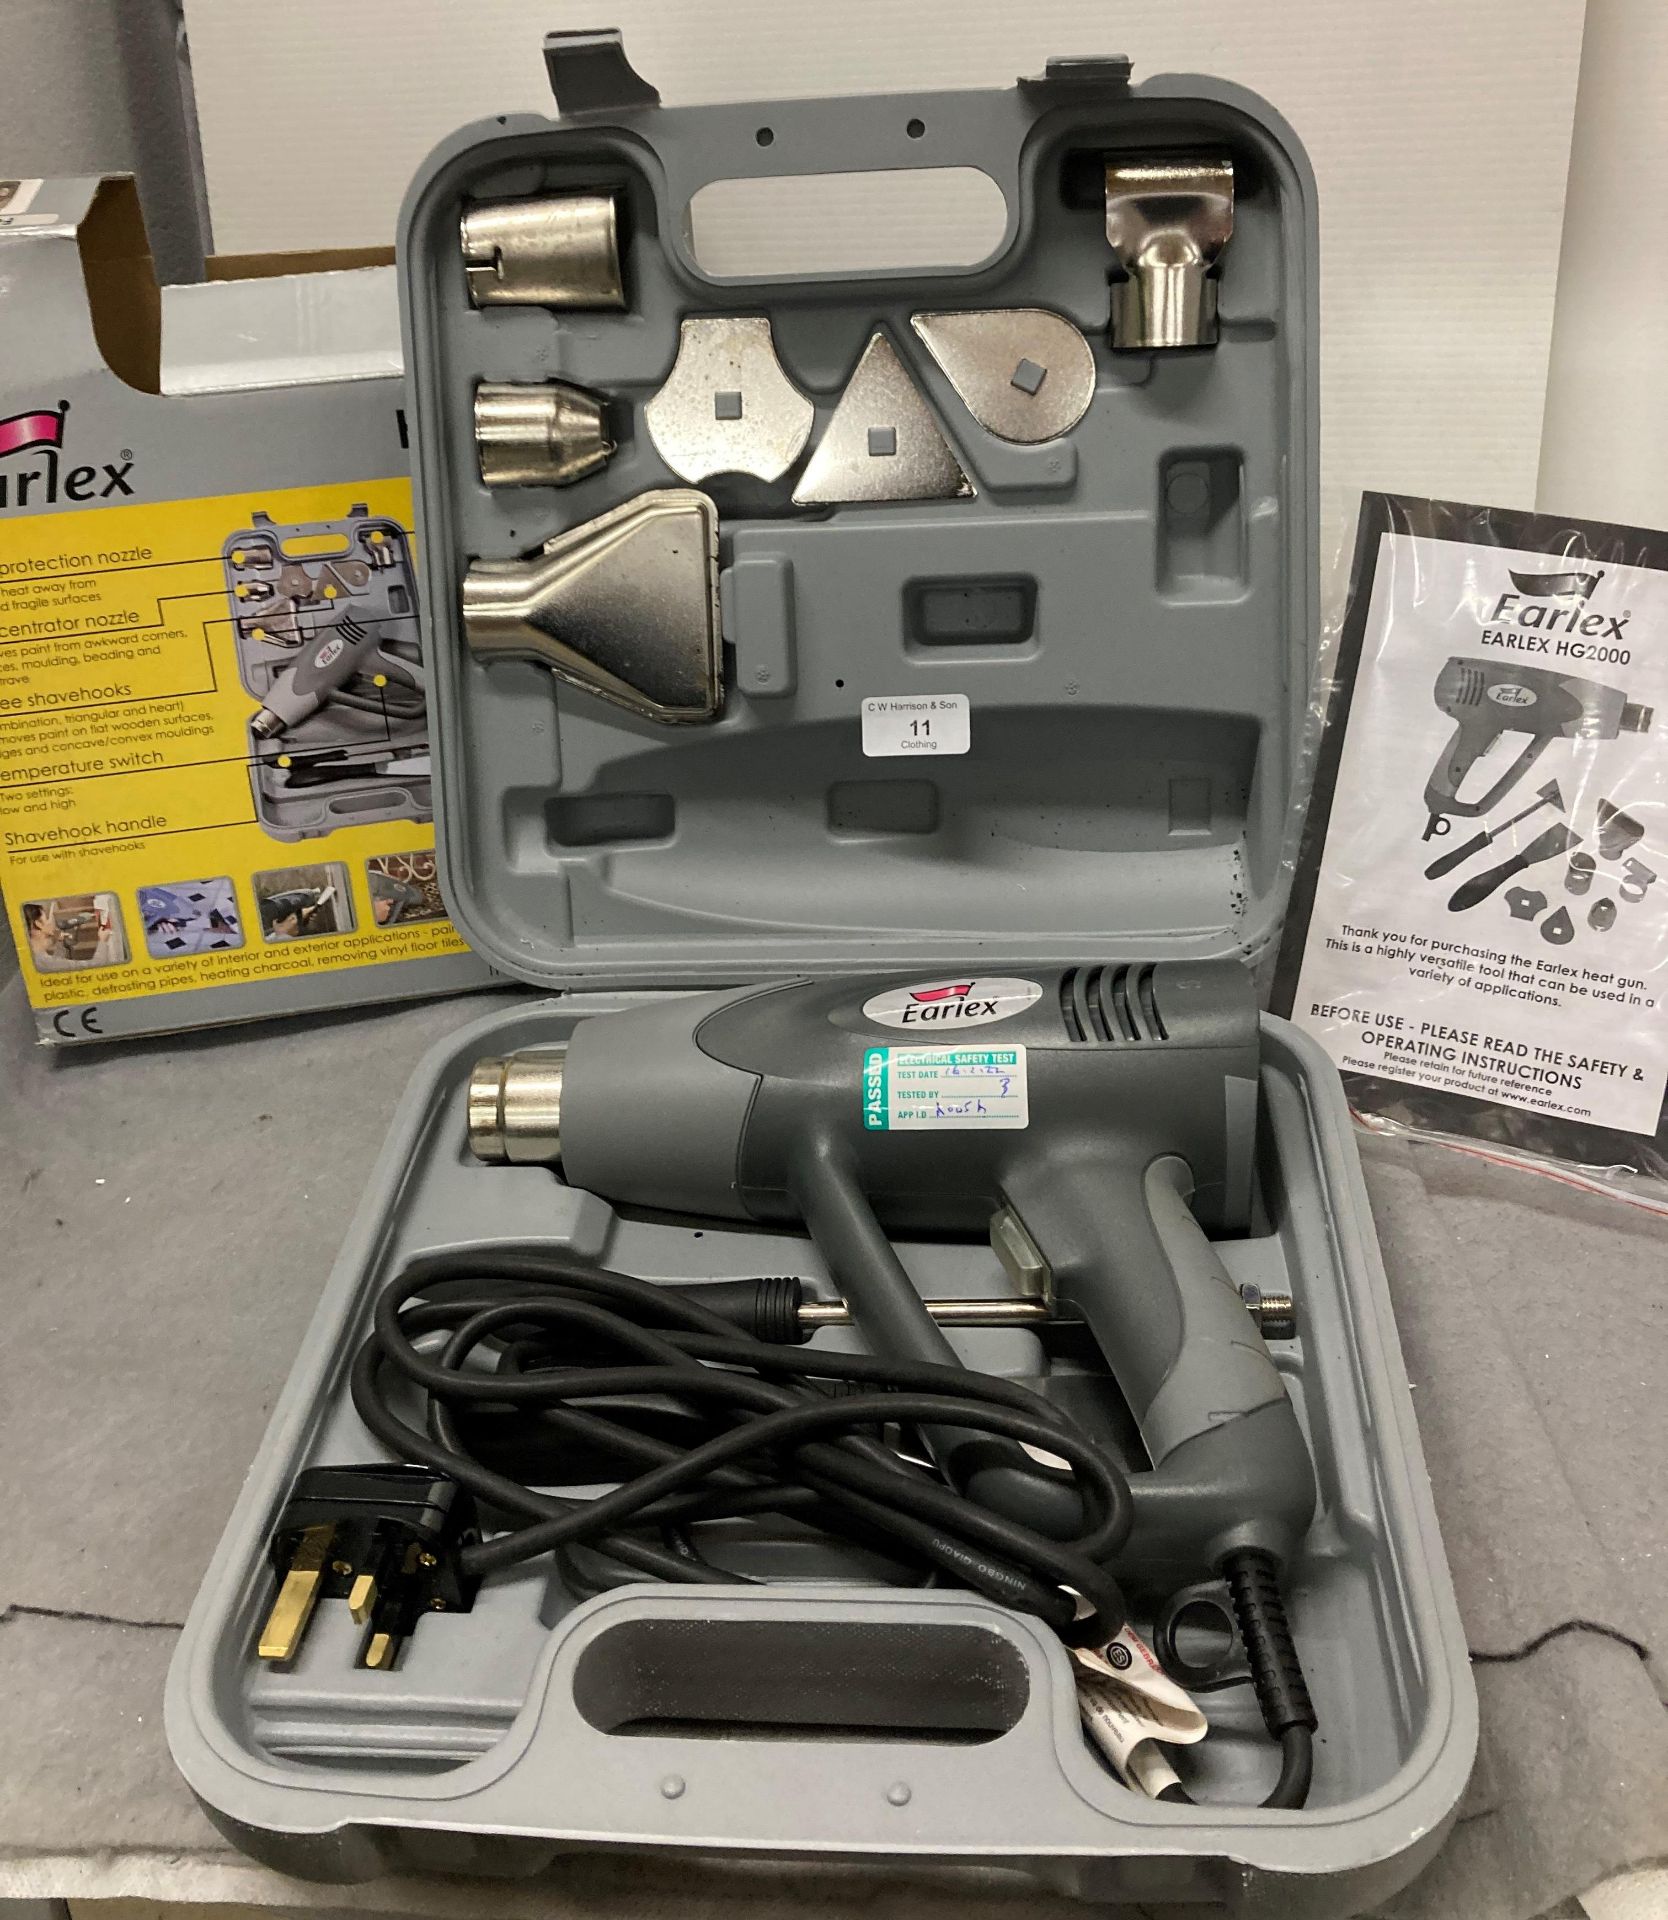 Earlex heat gun HG2000 in case *Please note the final purchase price is subject to 20% VAT on the